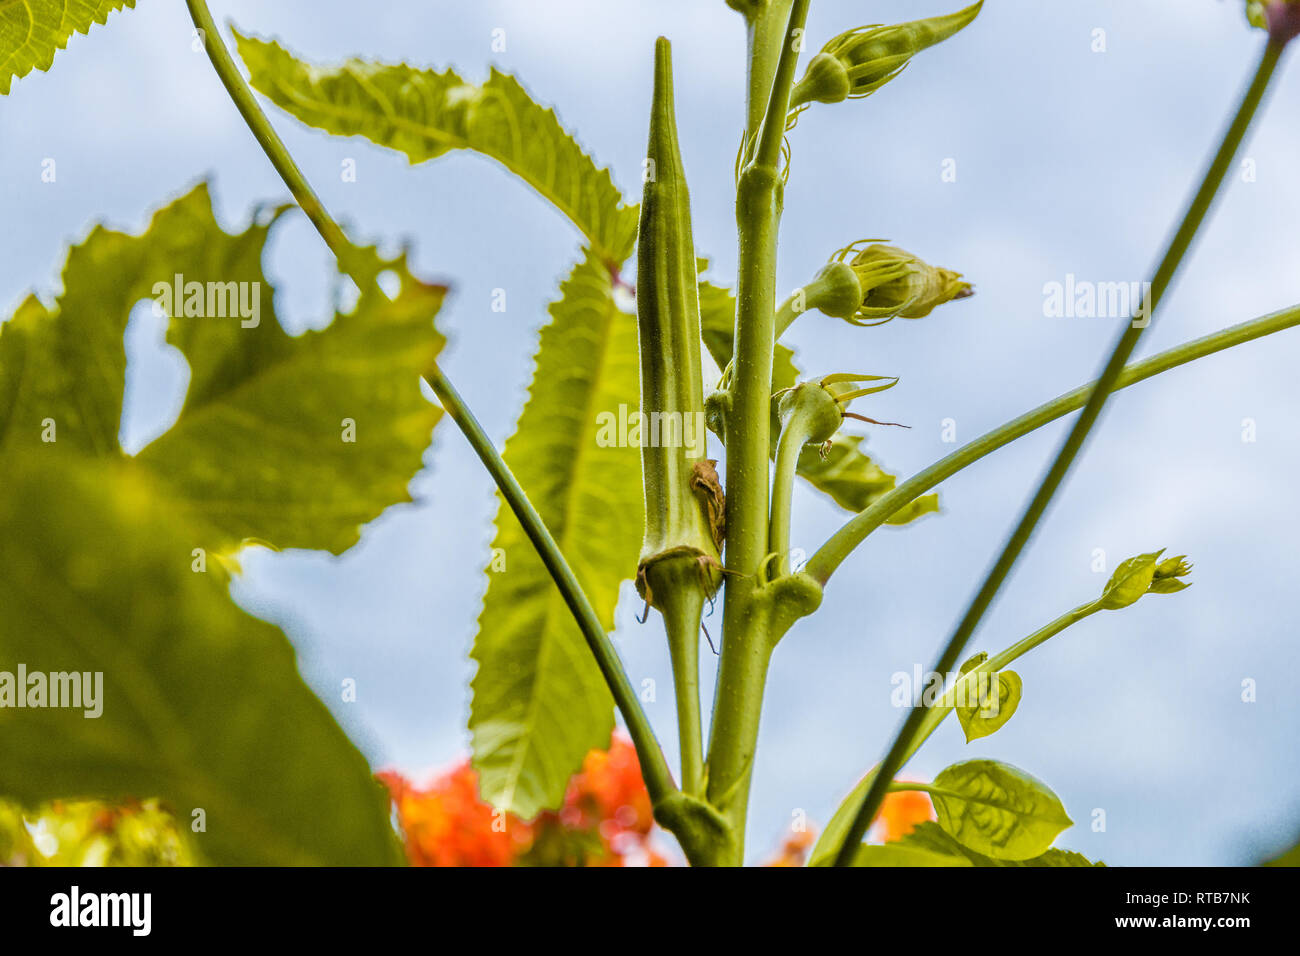 Great close-up image of an okra plant (Abelmoschus esculentus) with flower buds and a maturing & developing fruit. The green seed pods of this popular... Stock Photo